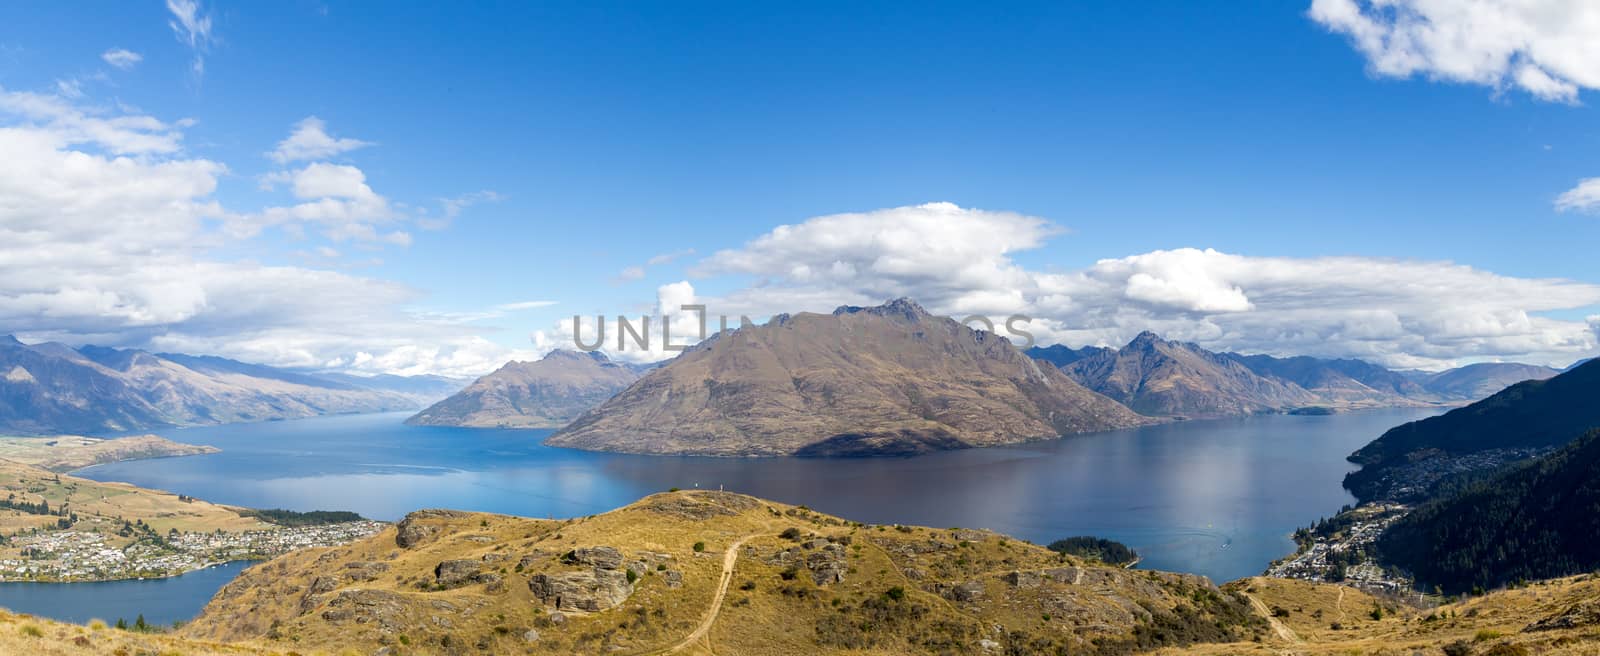 Queenstown, New Zealand - March 26, 2015: Panoramic view of the mountains and Lake Wakatipu from Queenstown Hill